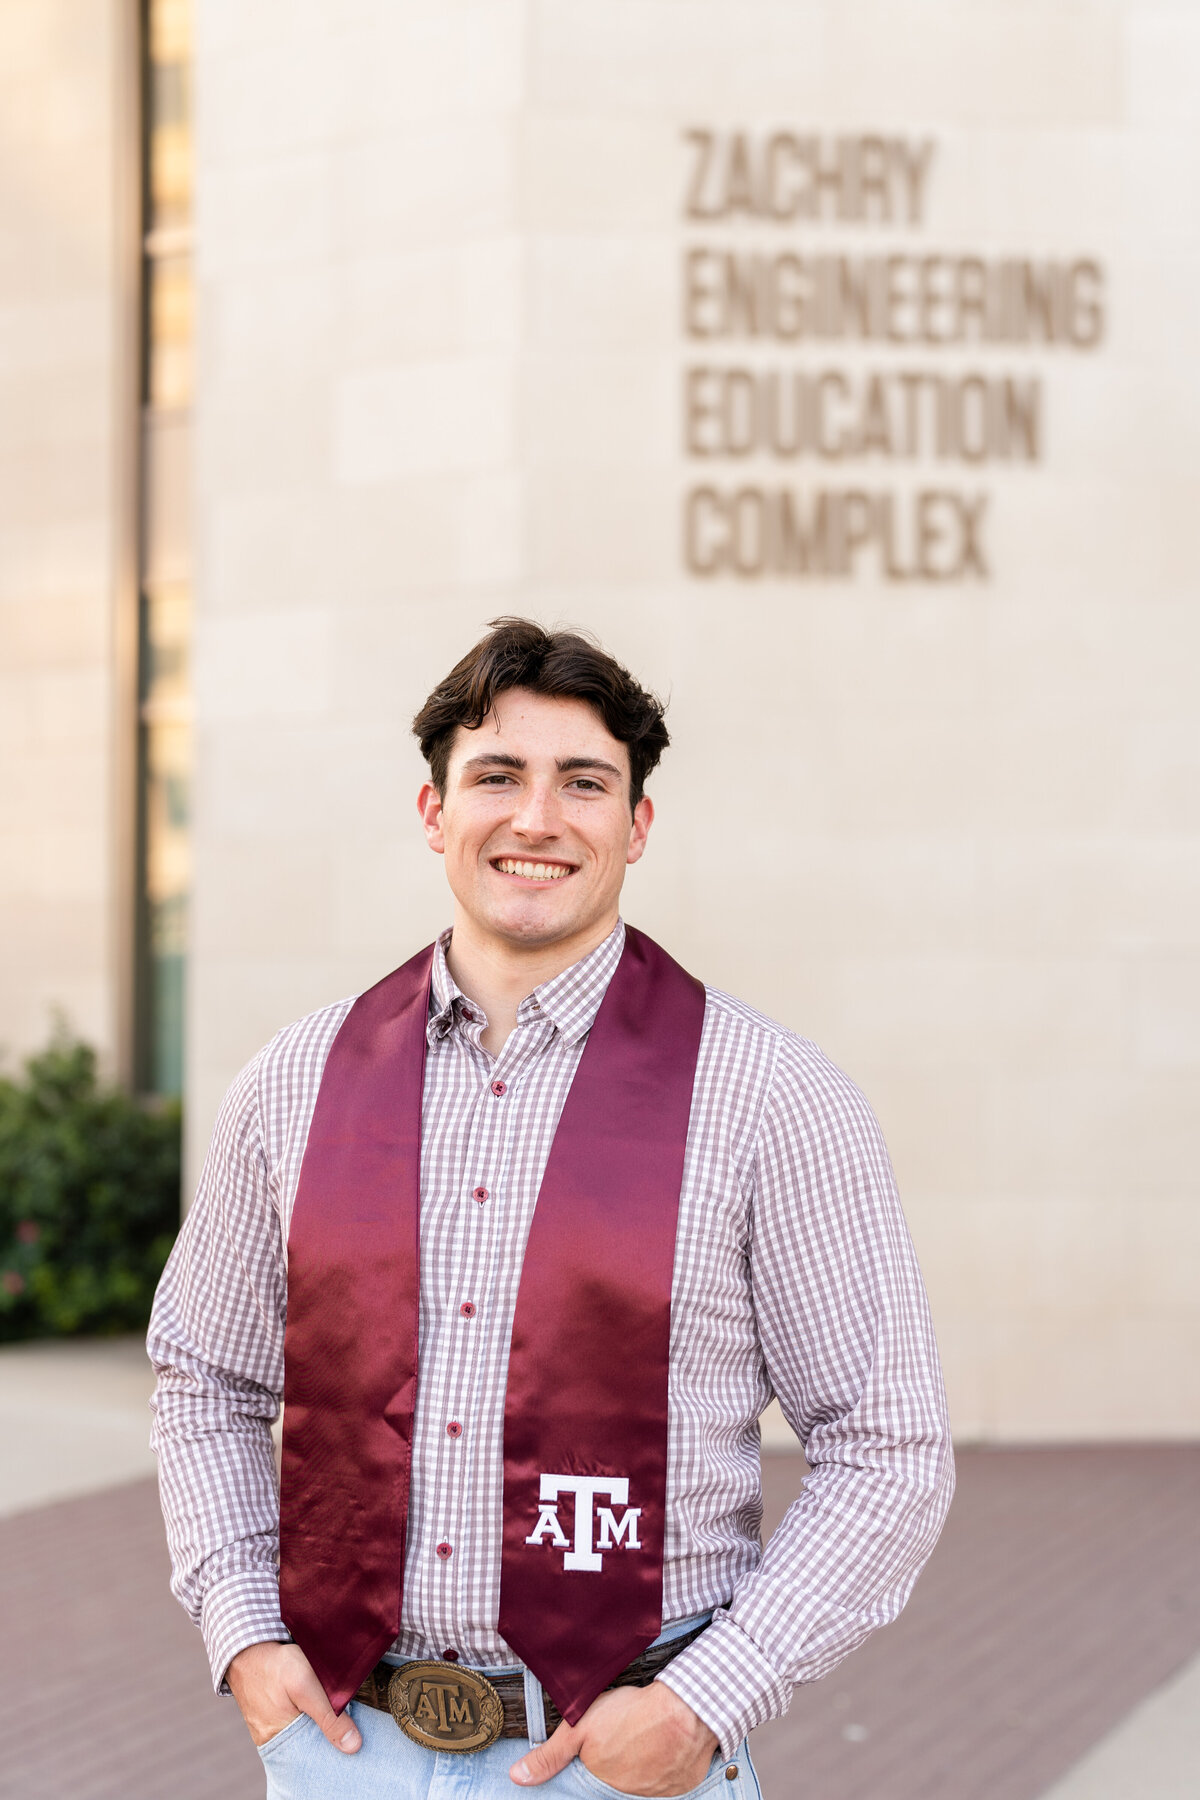 Texas A&M senior guy standing with hands in jeans pocket while wearing a checkered button up and Aggie stole with Zachry Engineering Building behind him